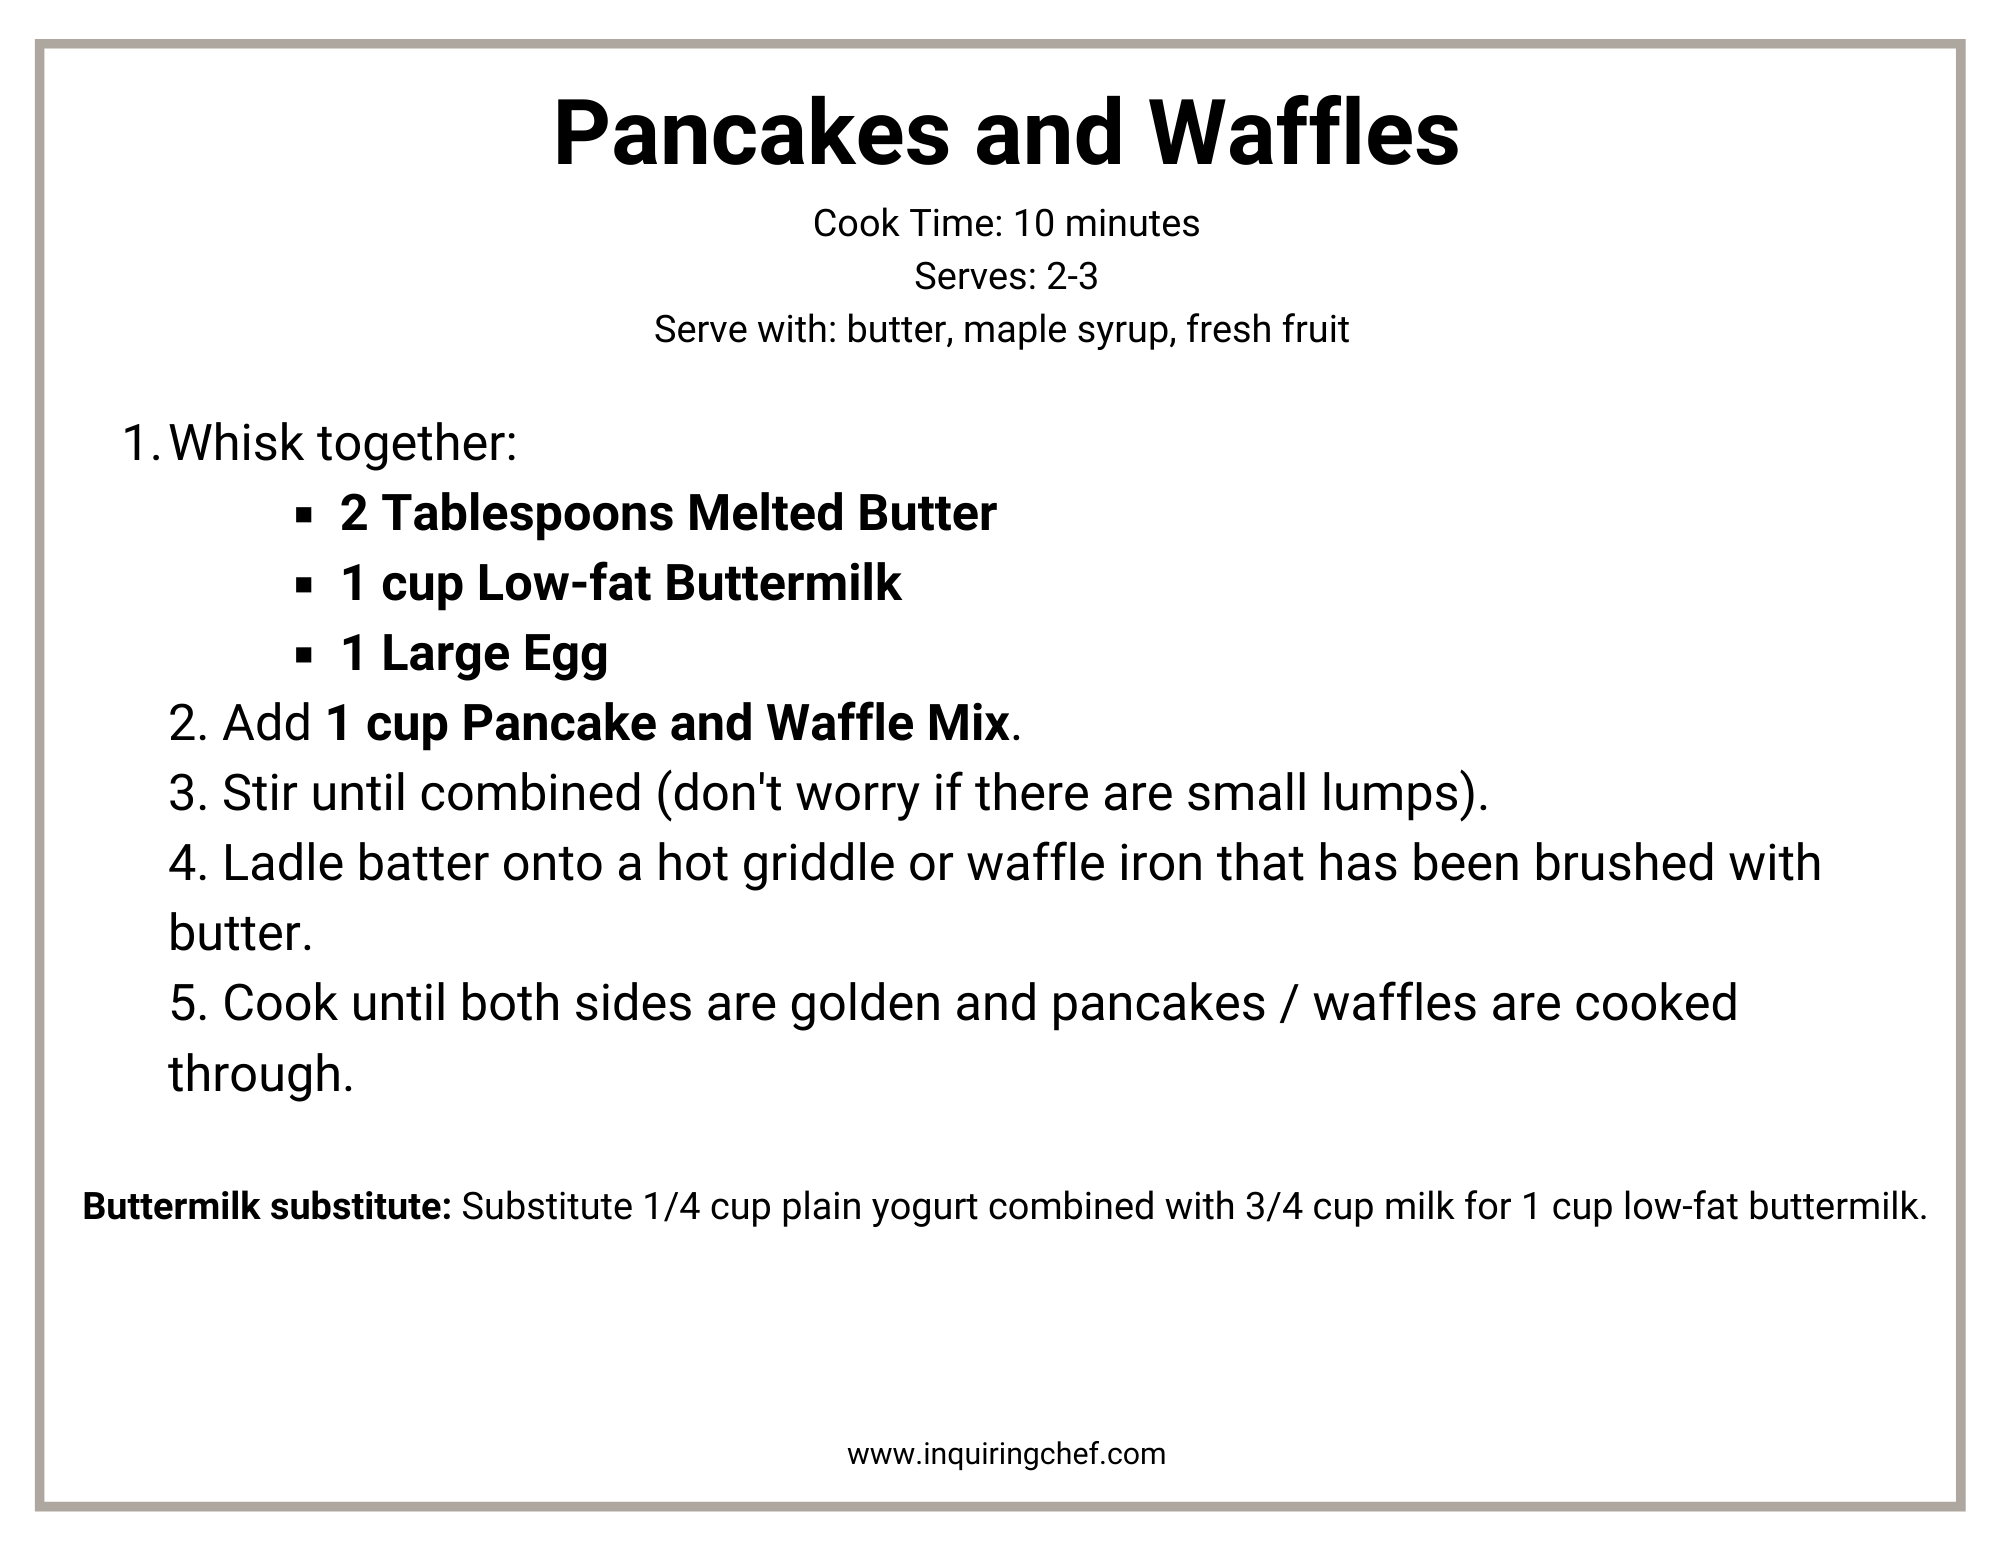 printable recipe card for pancakes and waffles from dry mix